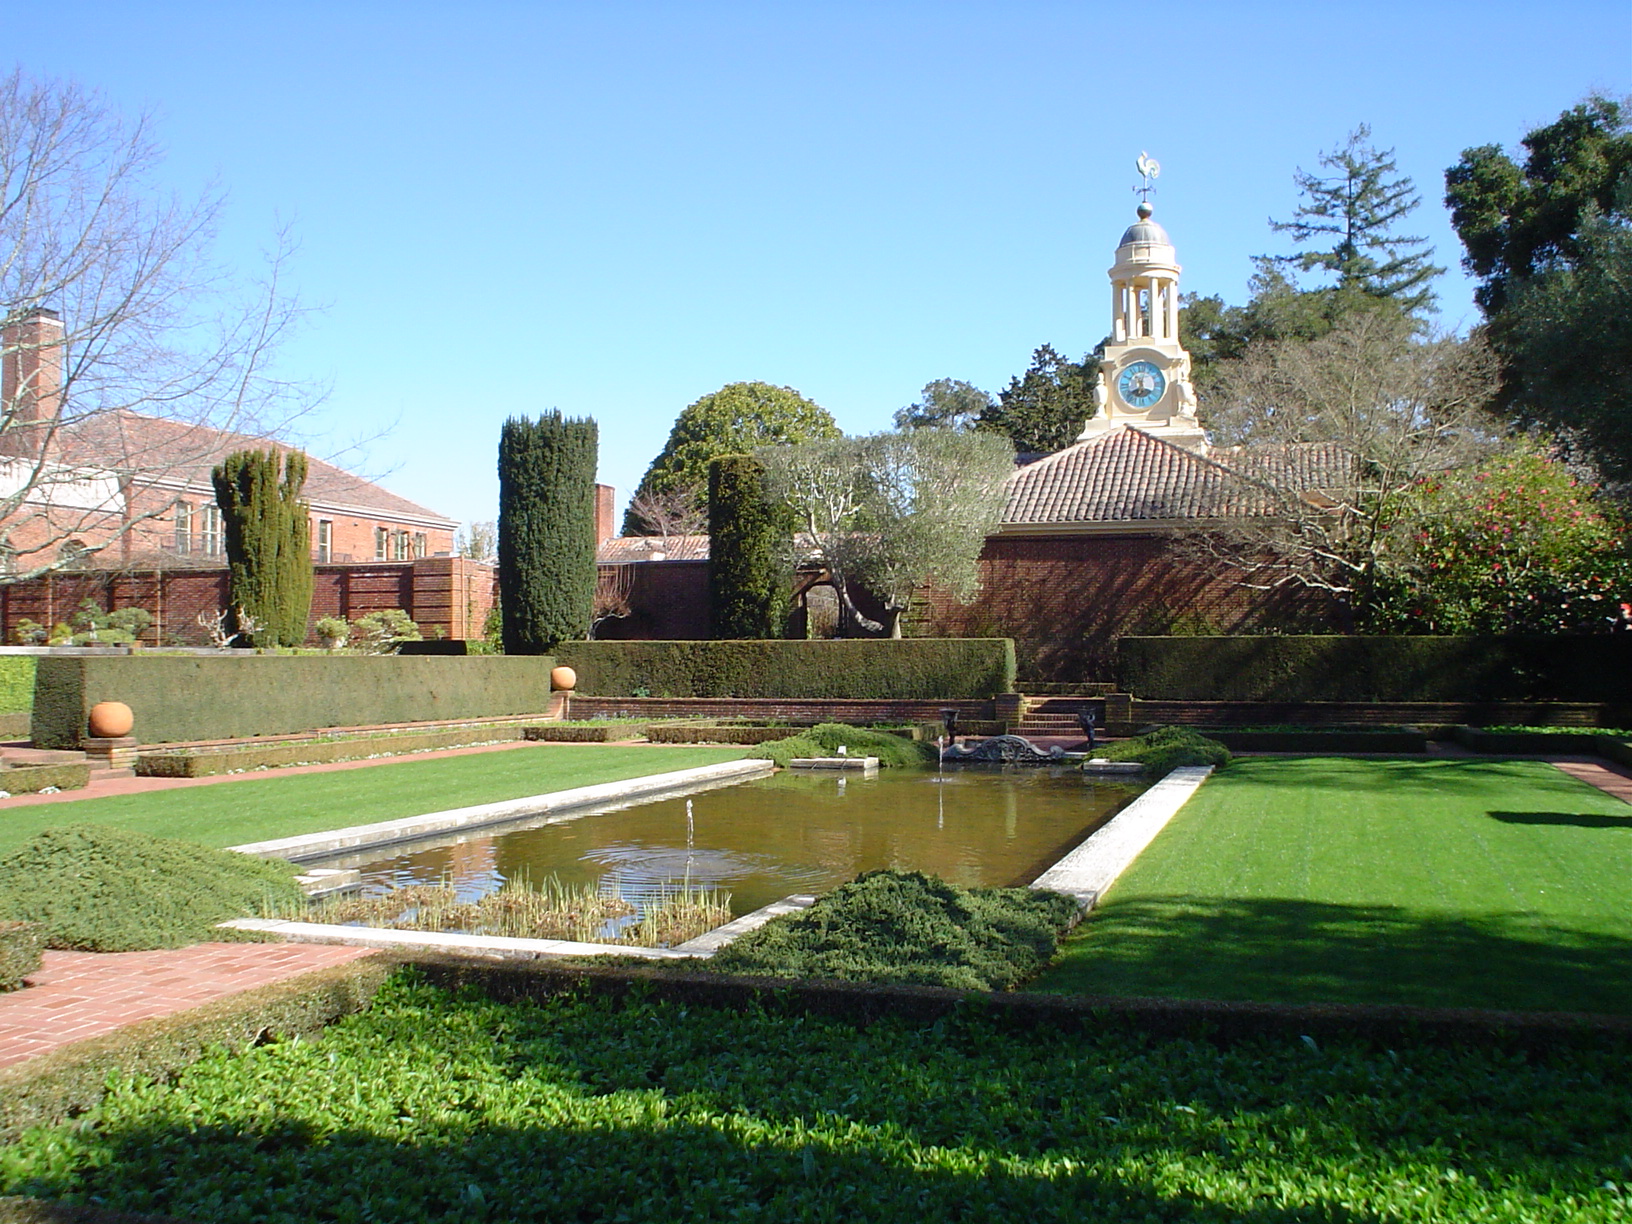 A large outdoor garden area with a large sunken pool and a large brick estate in the background on a sunny day.